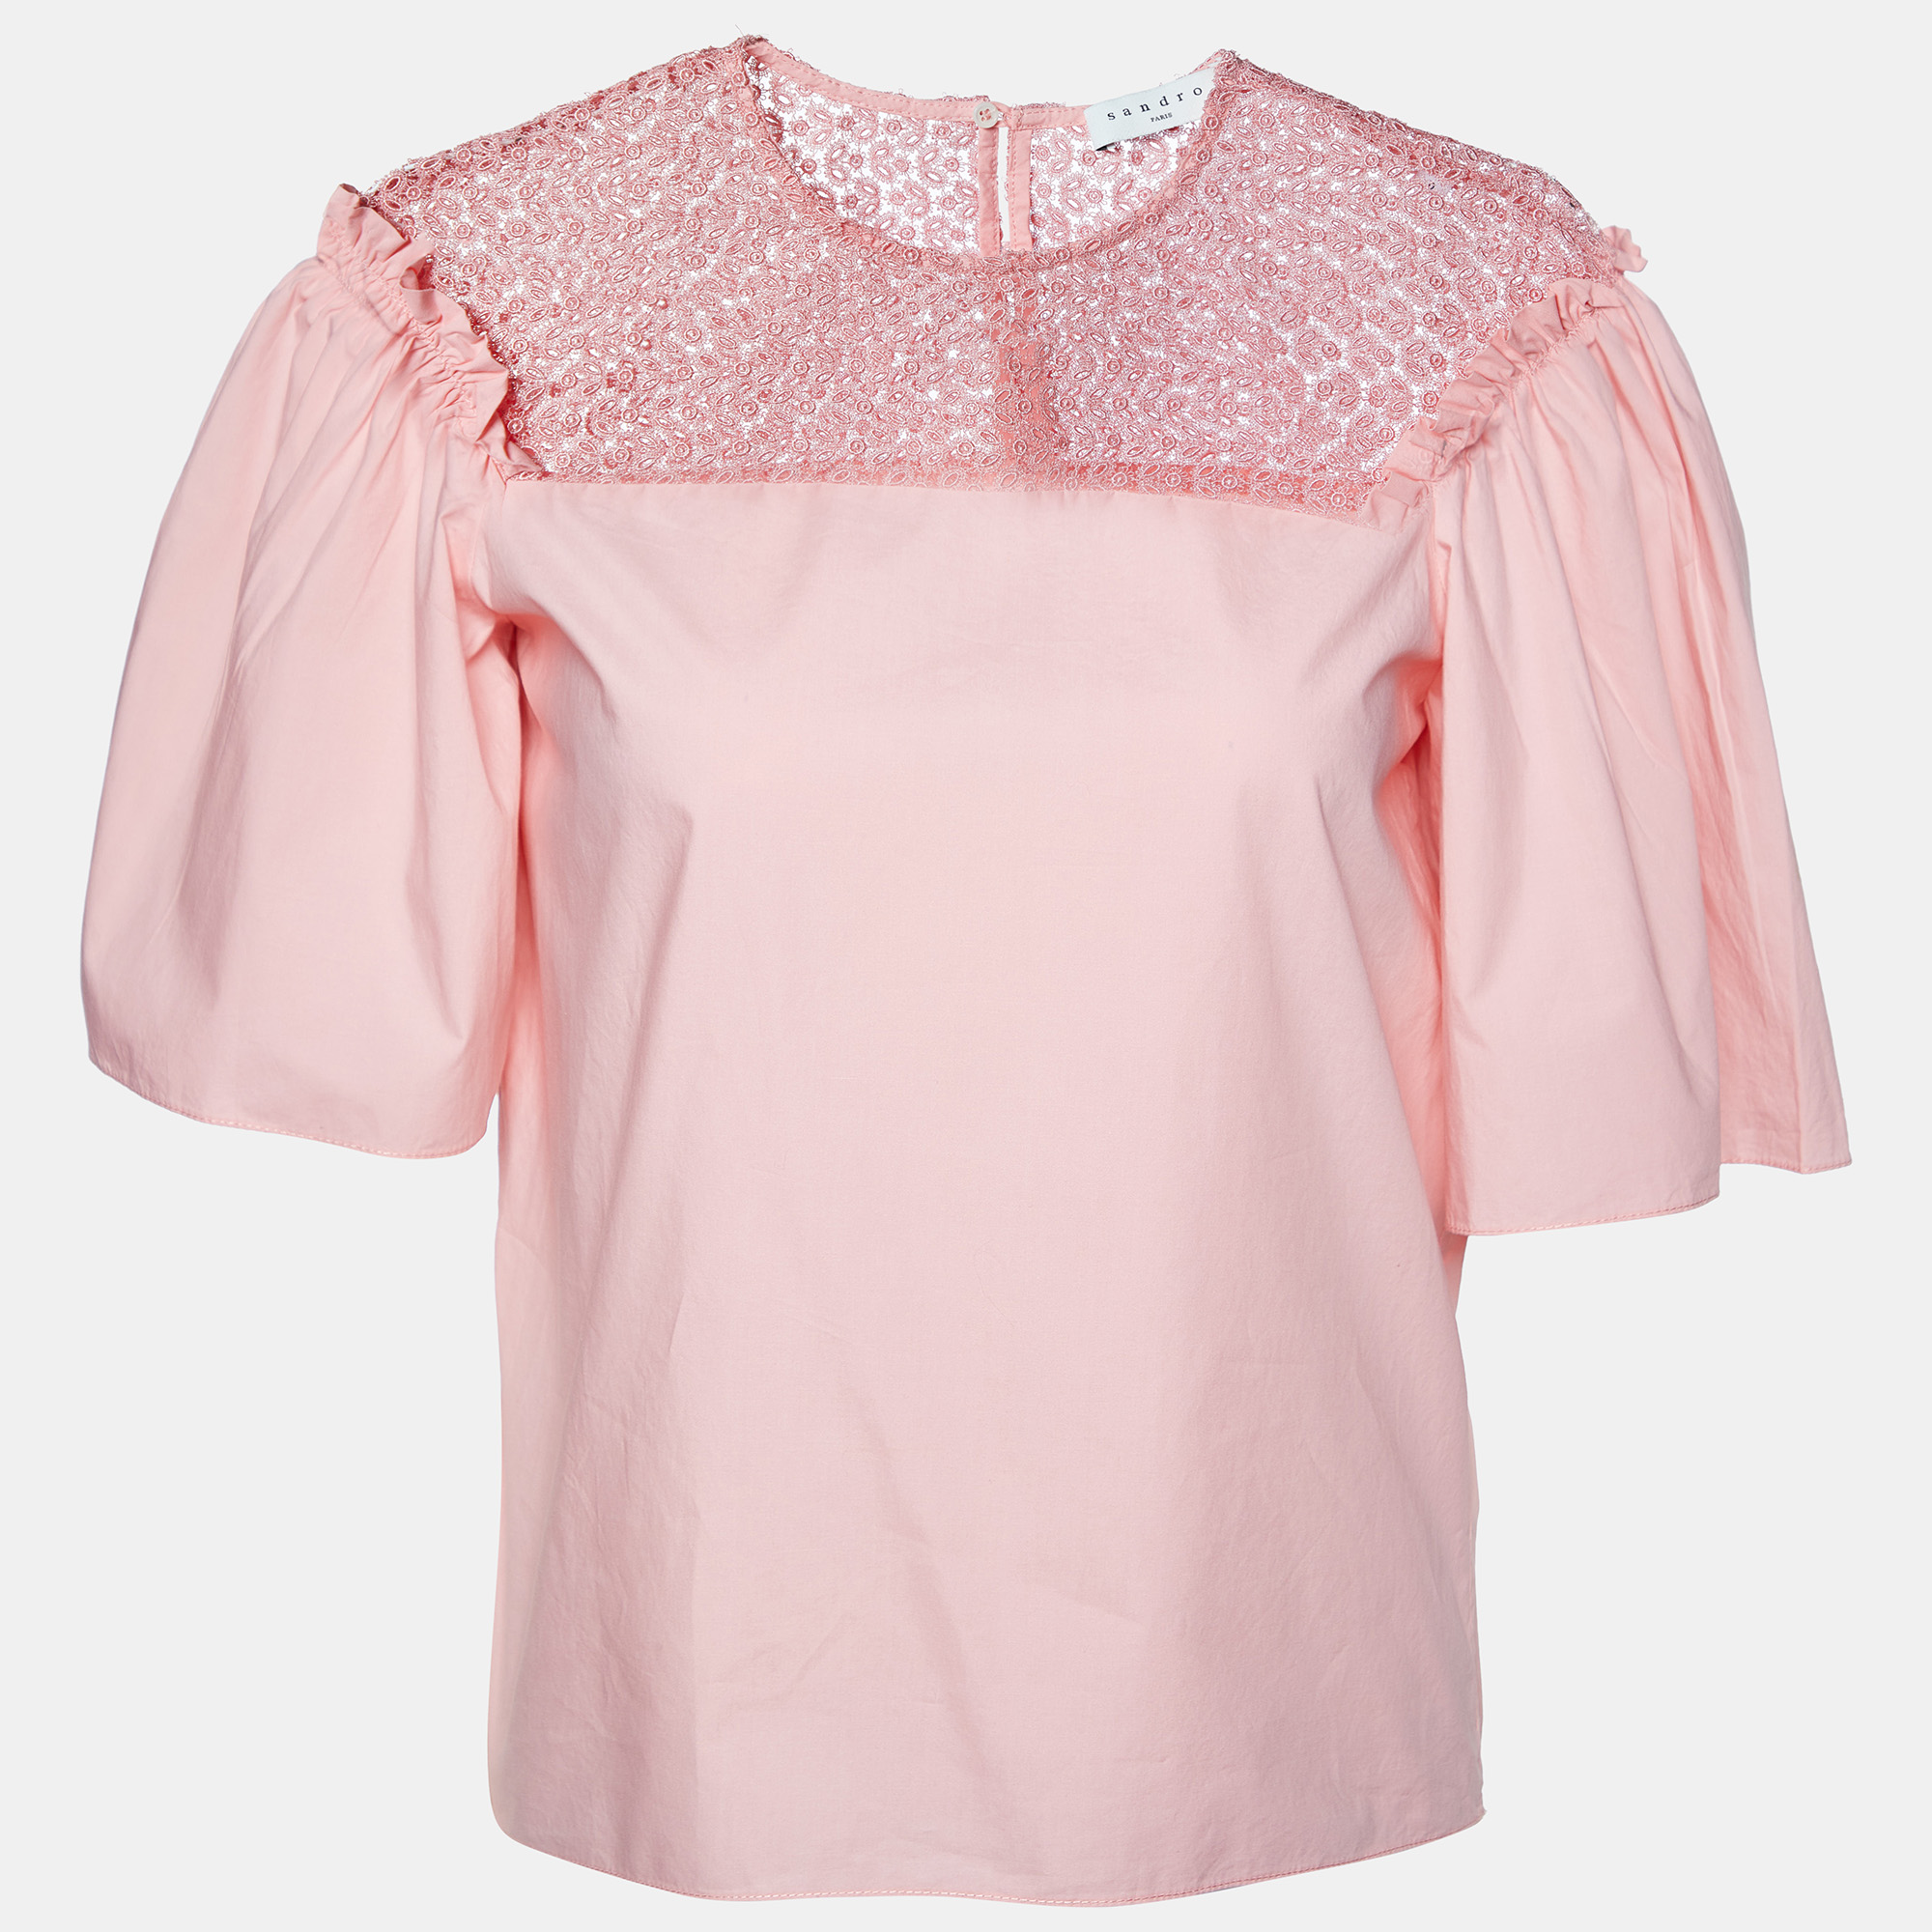 Sandro pink cotton lace trimmed blouse xs